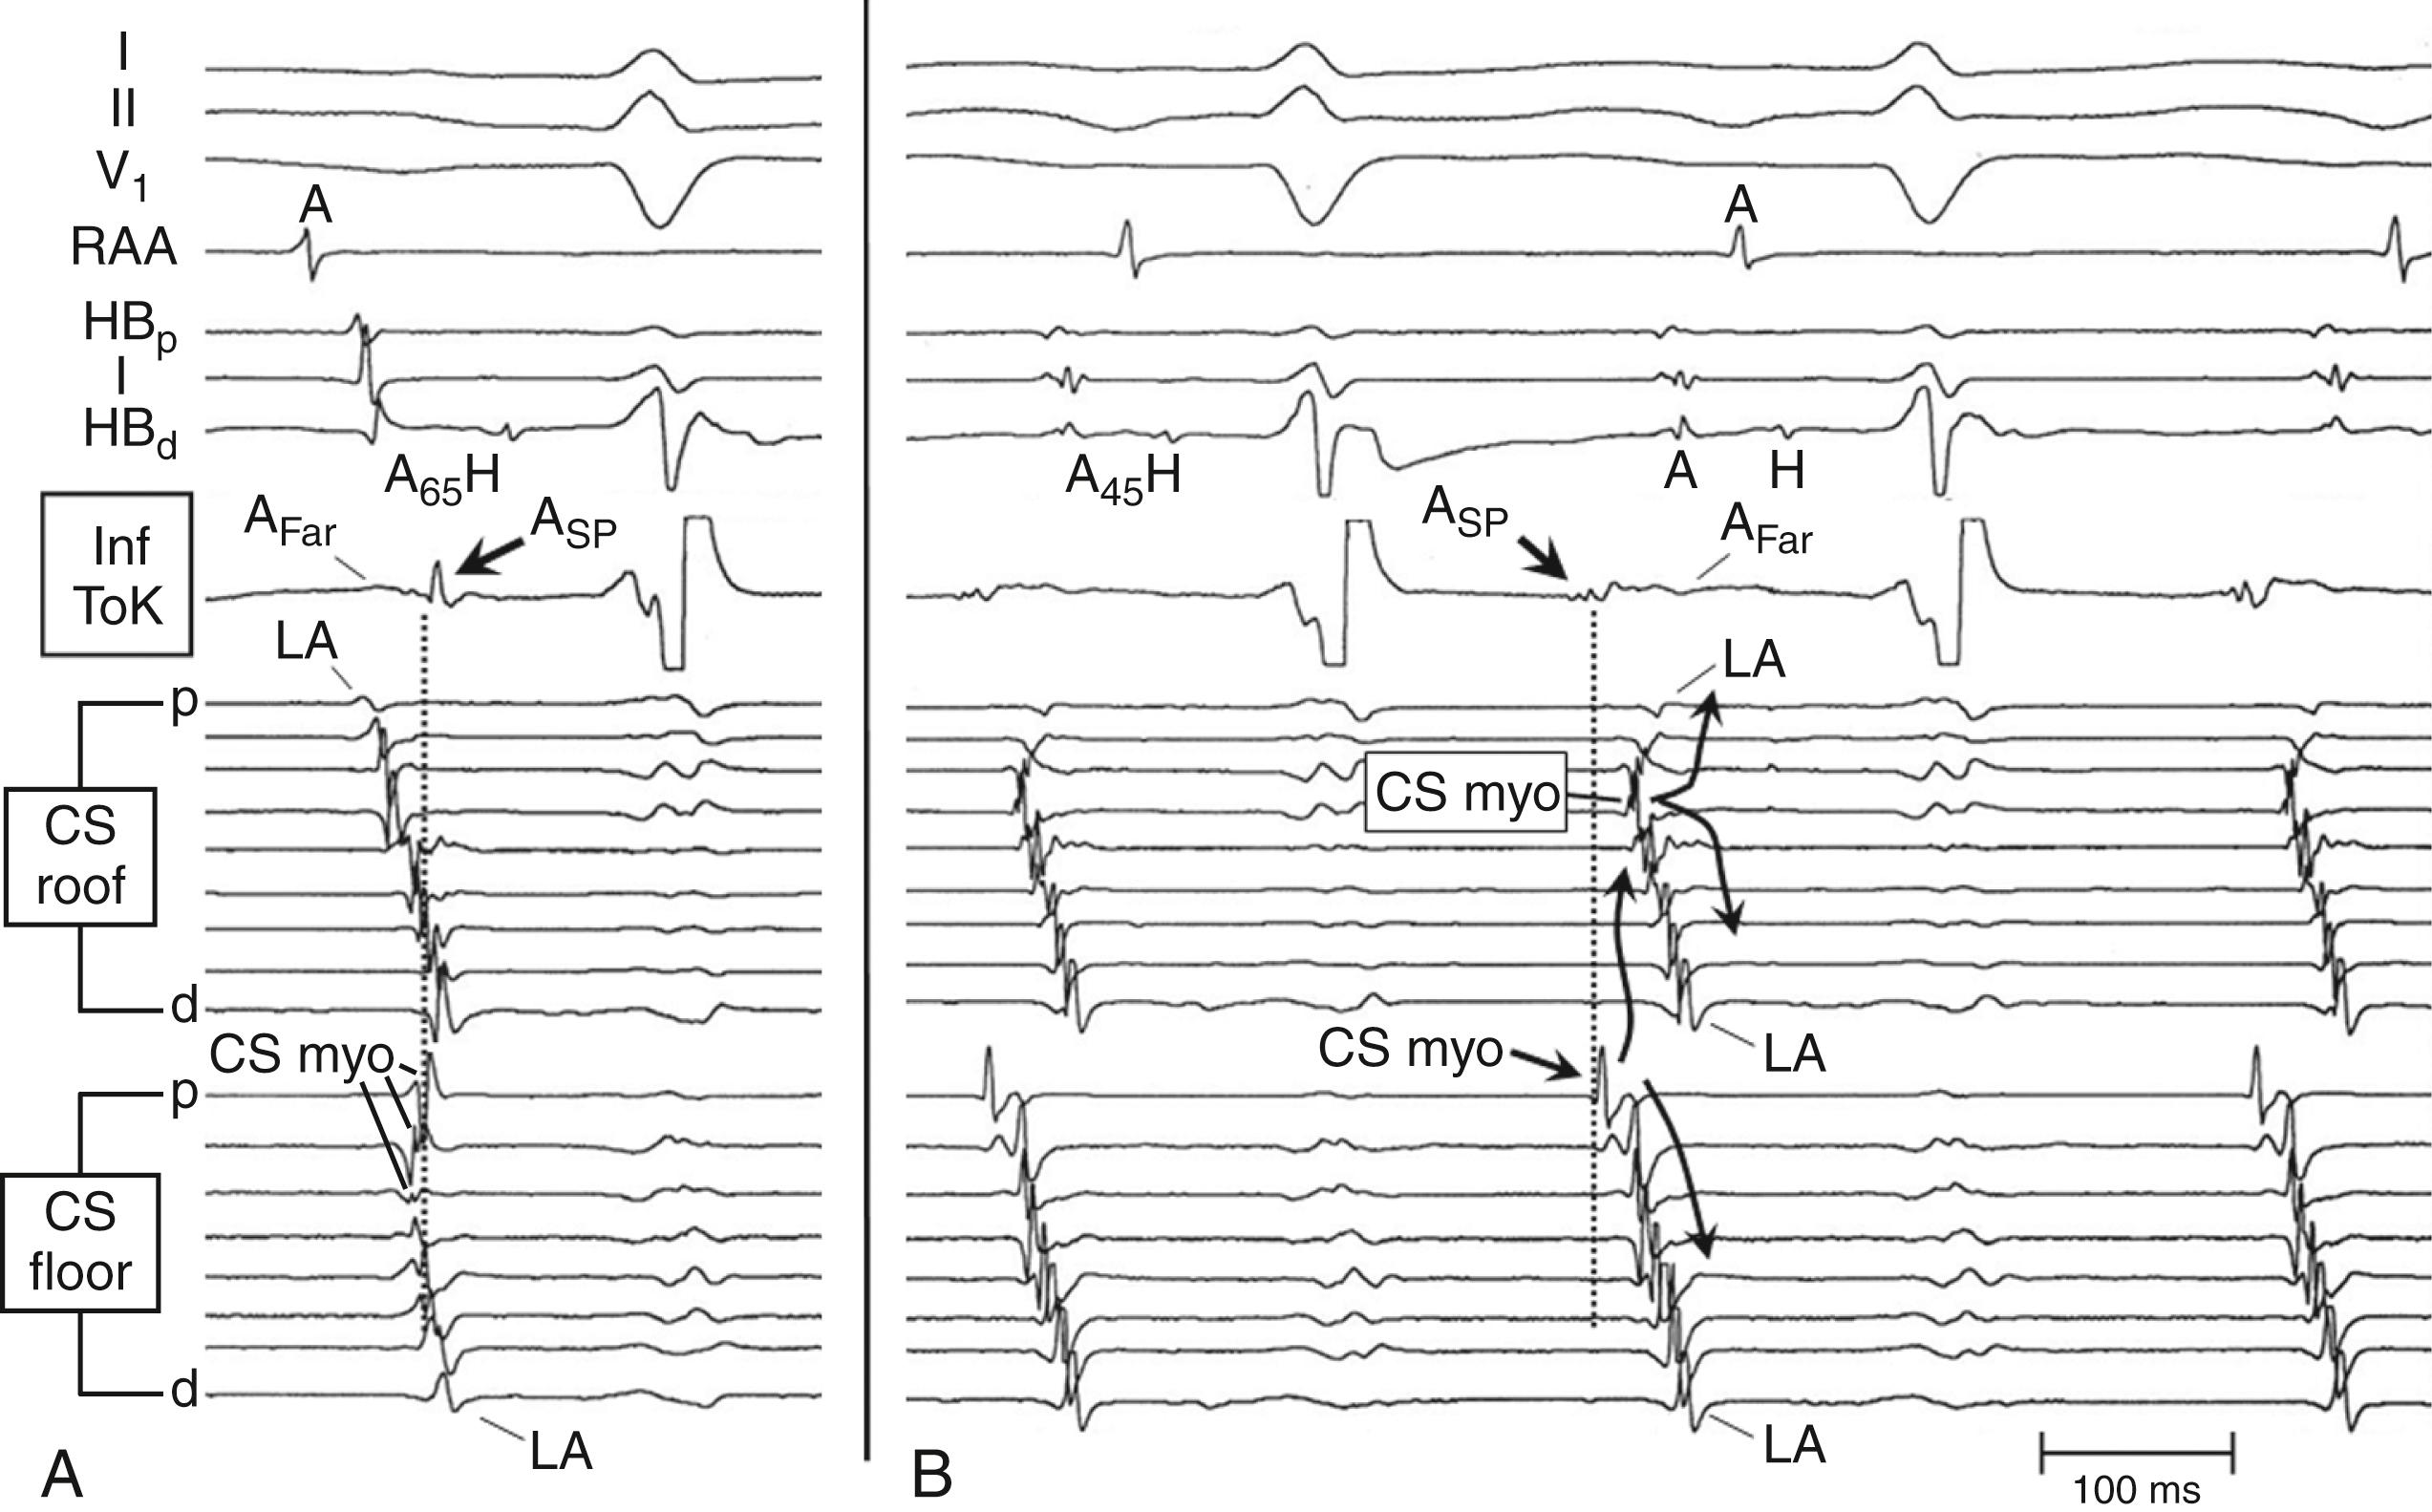 Fig. 72.8, Pattern of atrial activation during sinus rhythm and during Fast/Slow atrioventricular nodal reentrant tachycardia (AVNRT) using the leftward inferior extension (LIE) for the anterograde limb and the rightward inferior extension (RIE) for the retrograde limb of the tachycardia circuit.